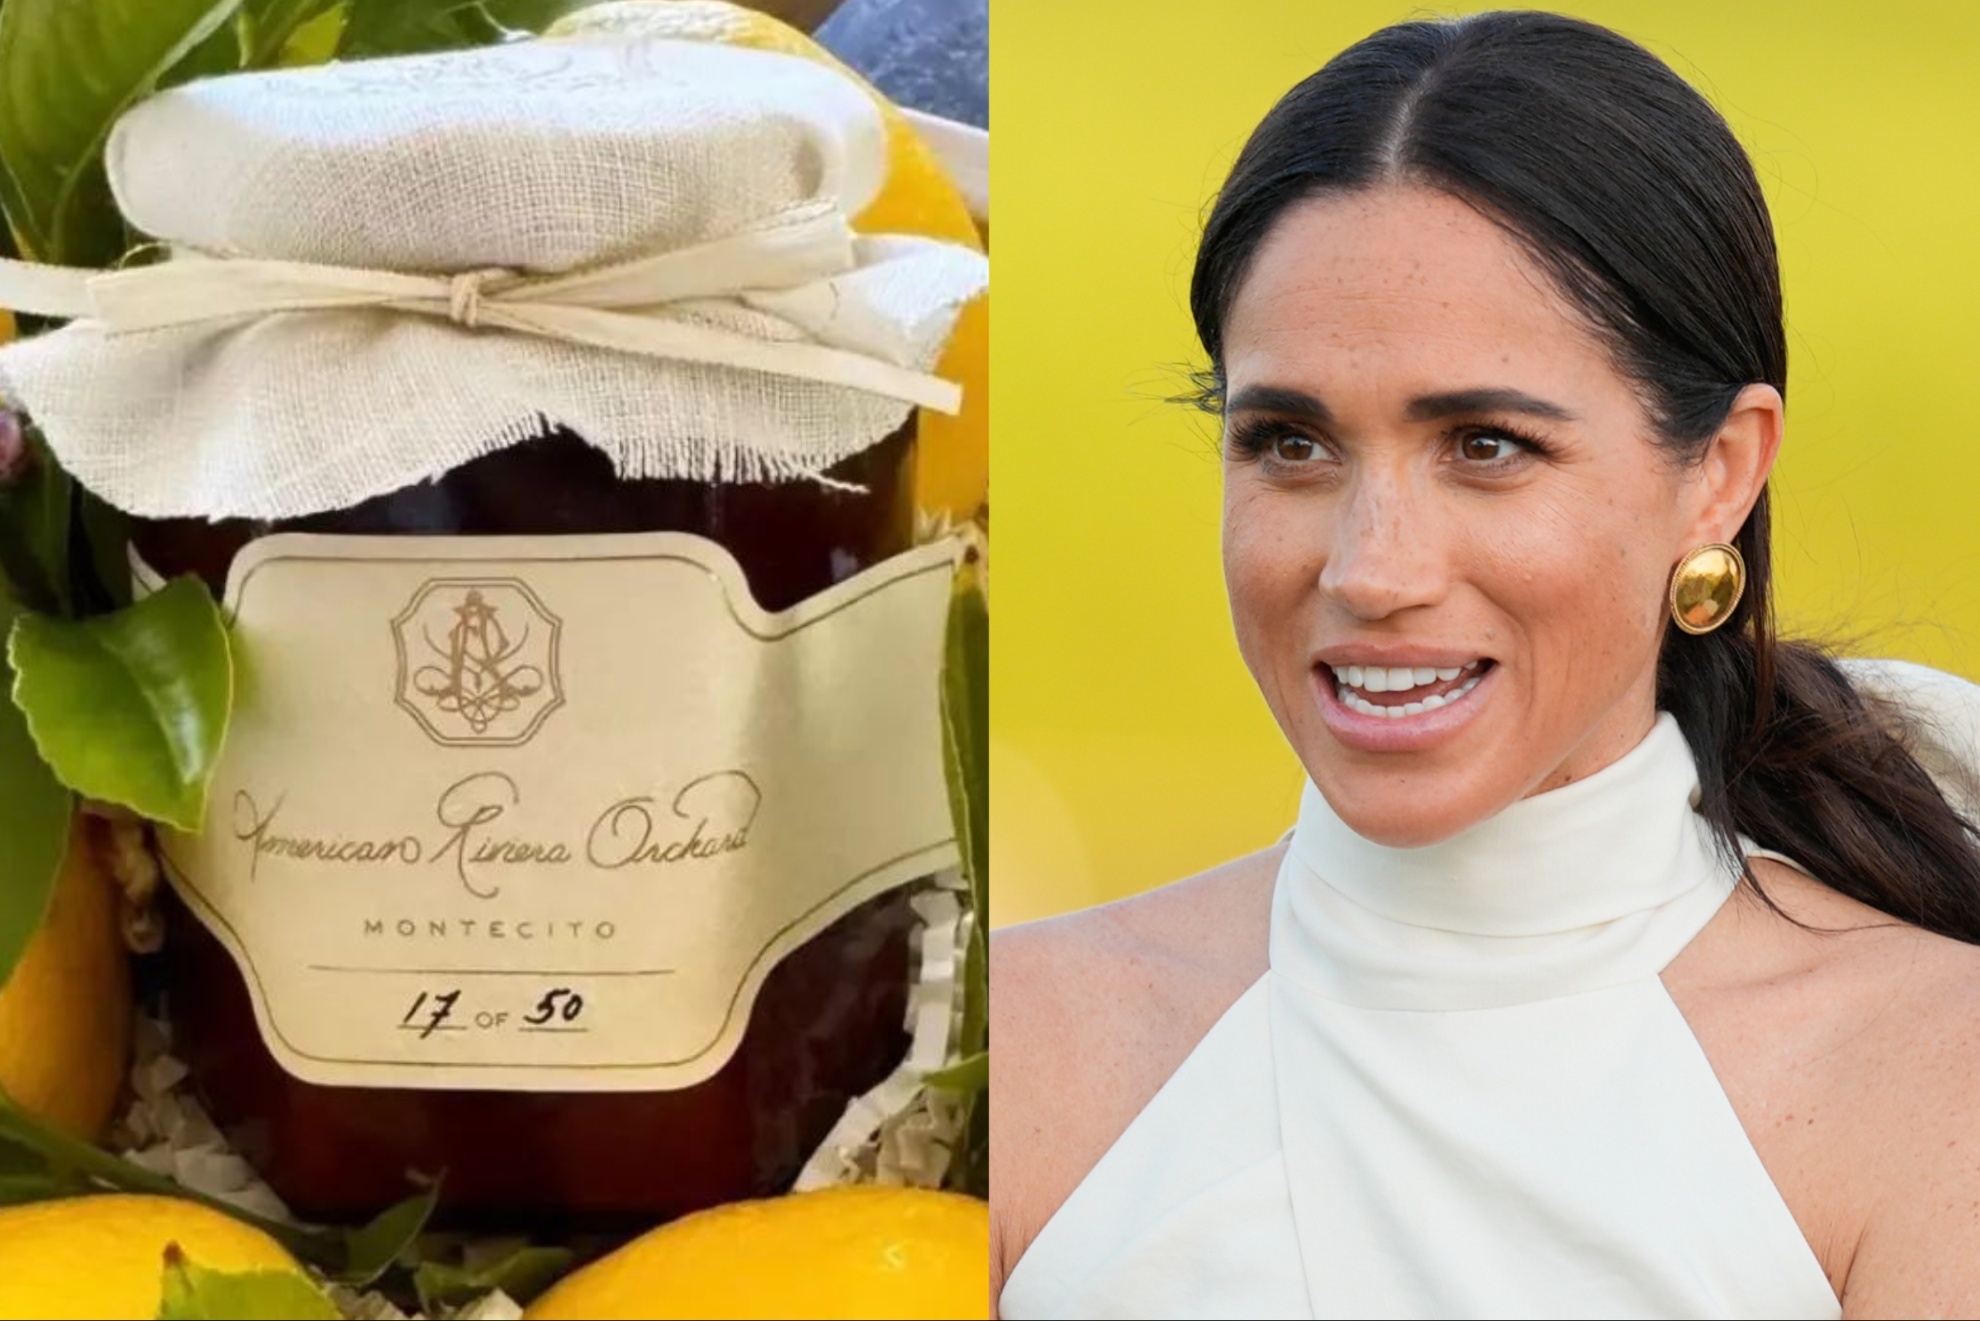 Meghan Markle (right) sent the first product of her brand new company.